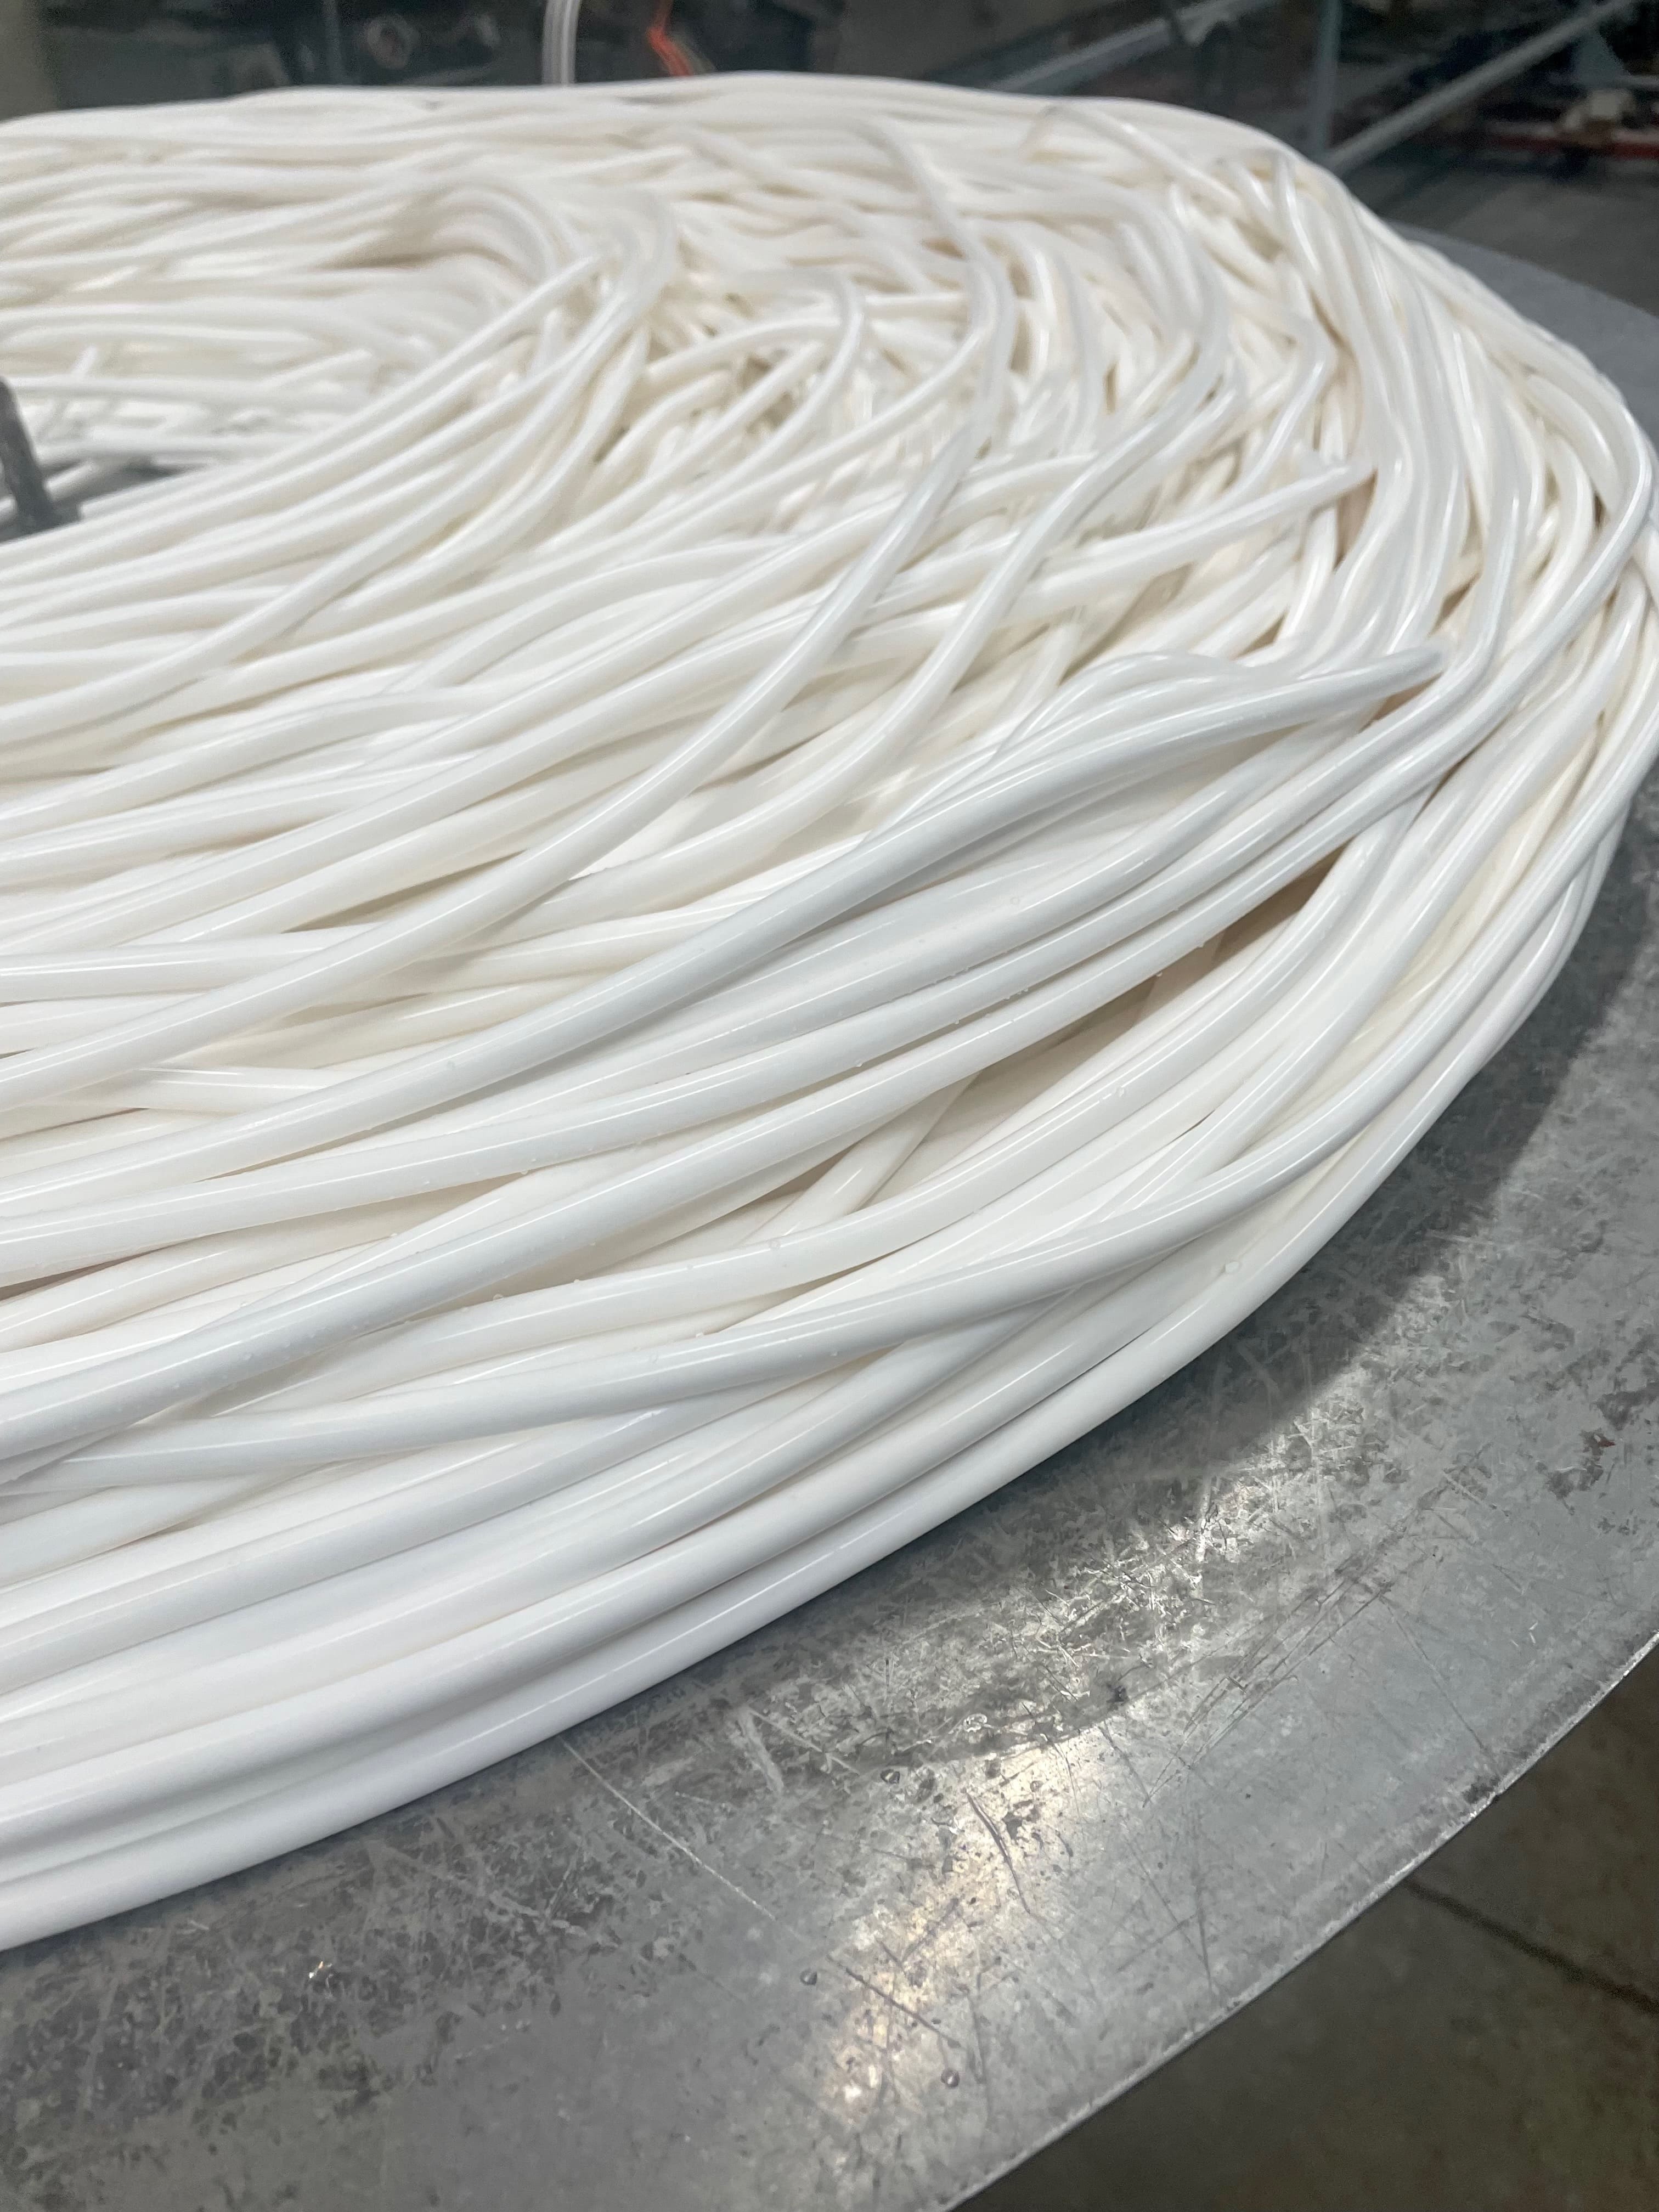 Thin, white silicone tubing sitting coiled up on a large spinner